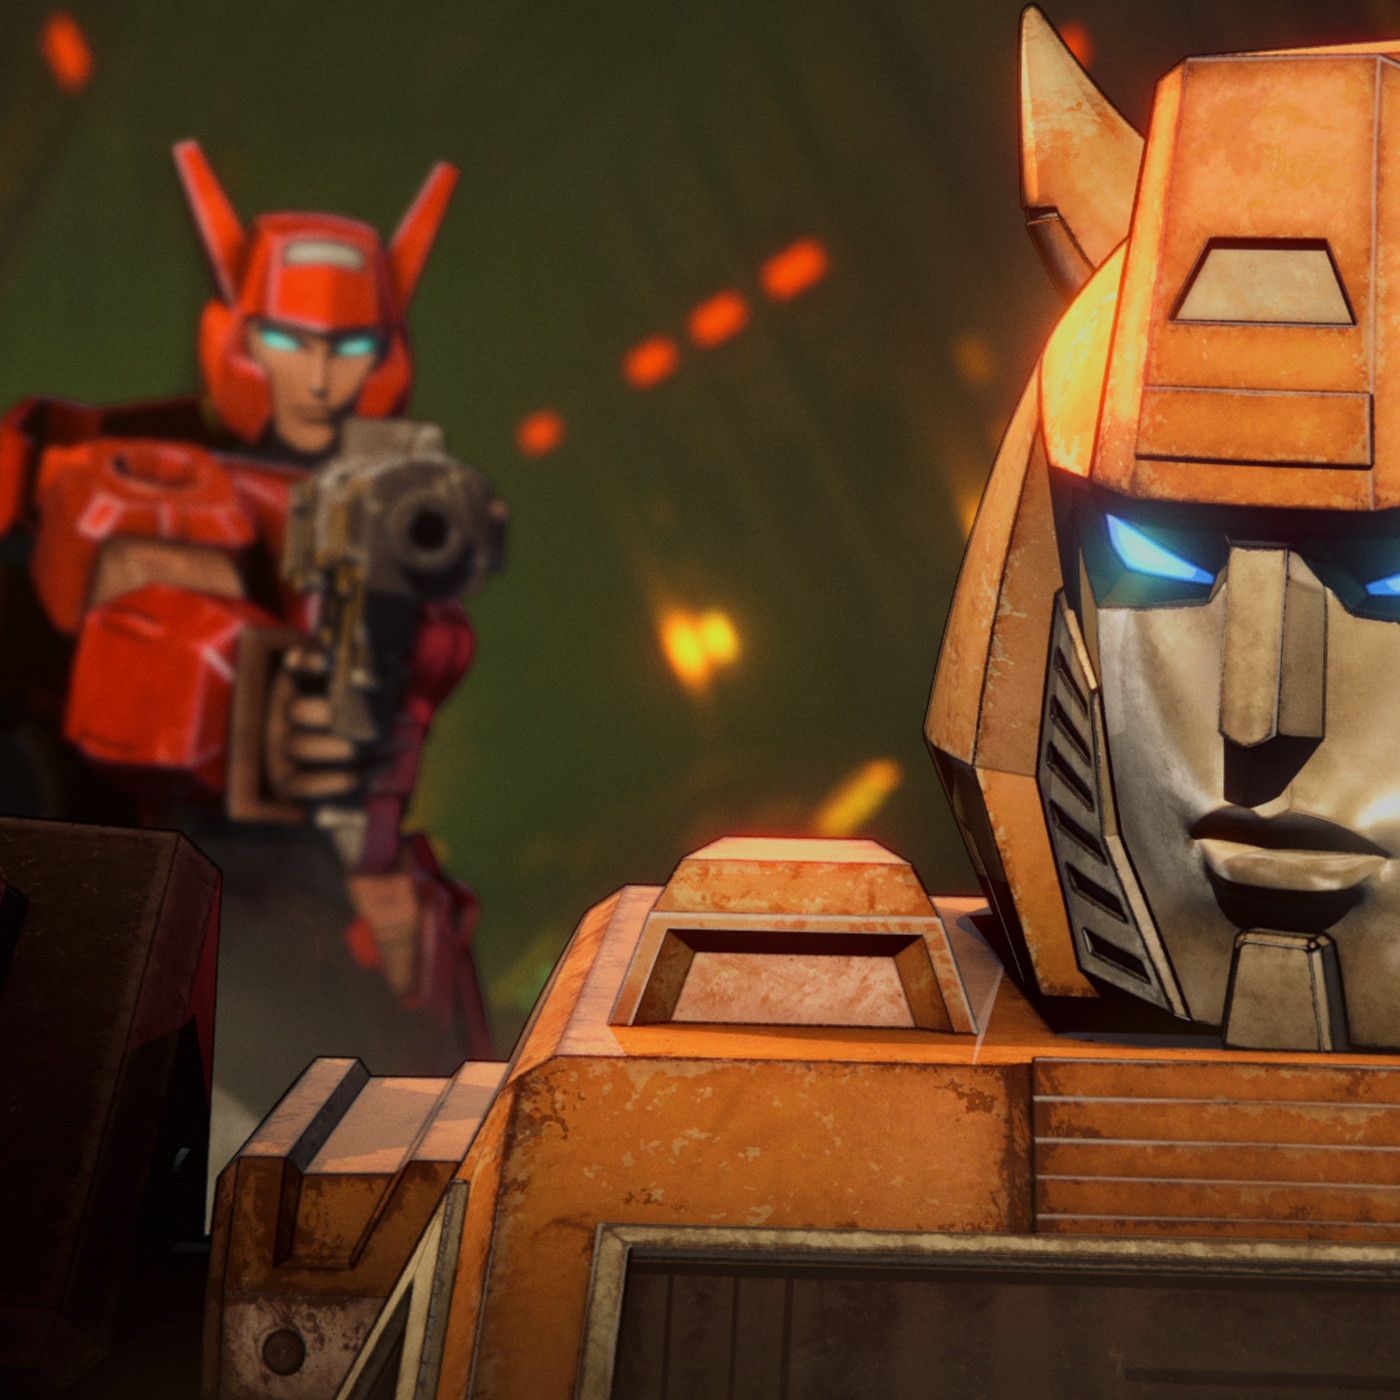 Transformers: War for Cybertron: character cameos and Easter Eggs guide